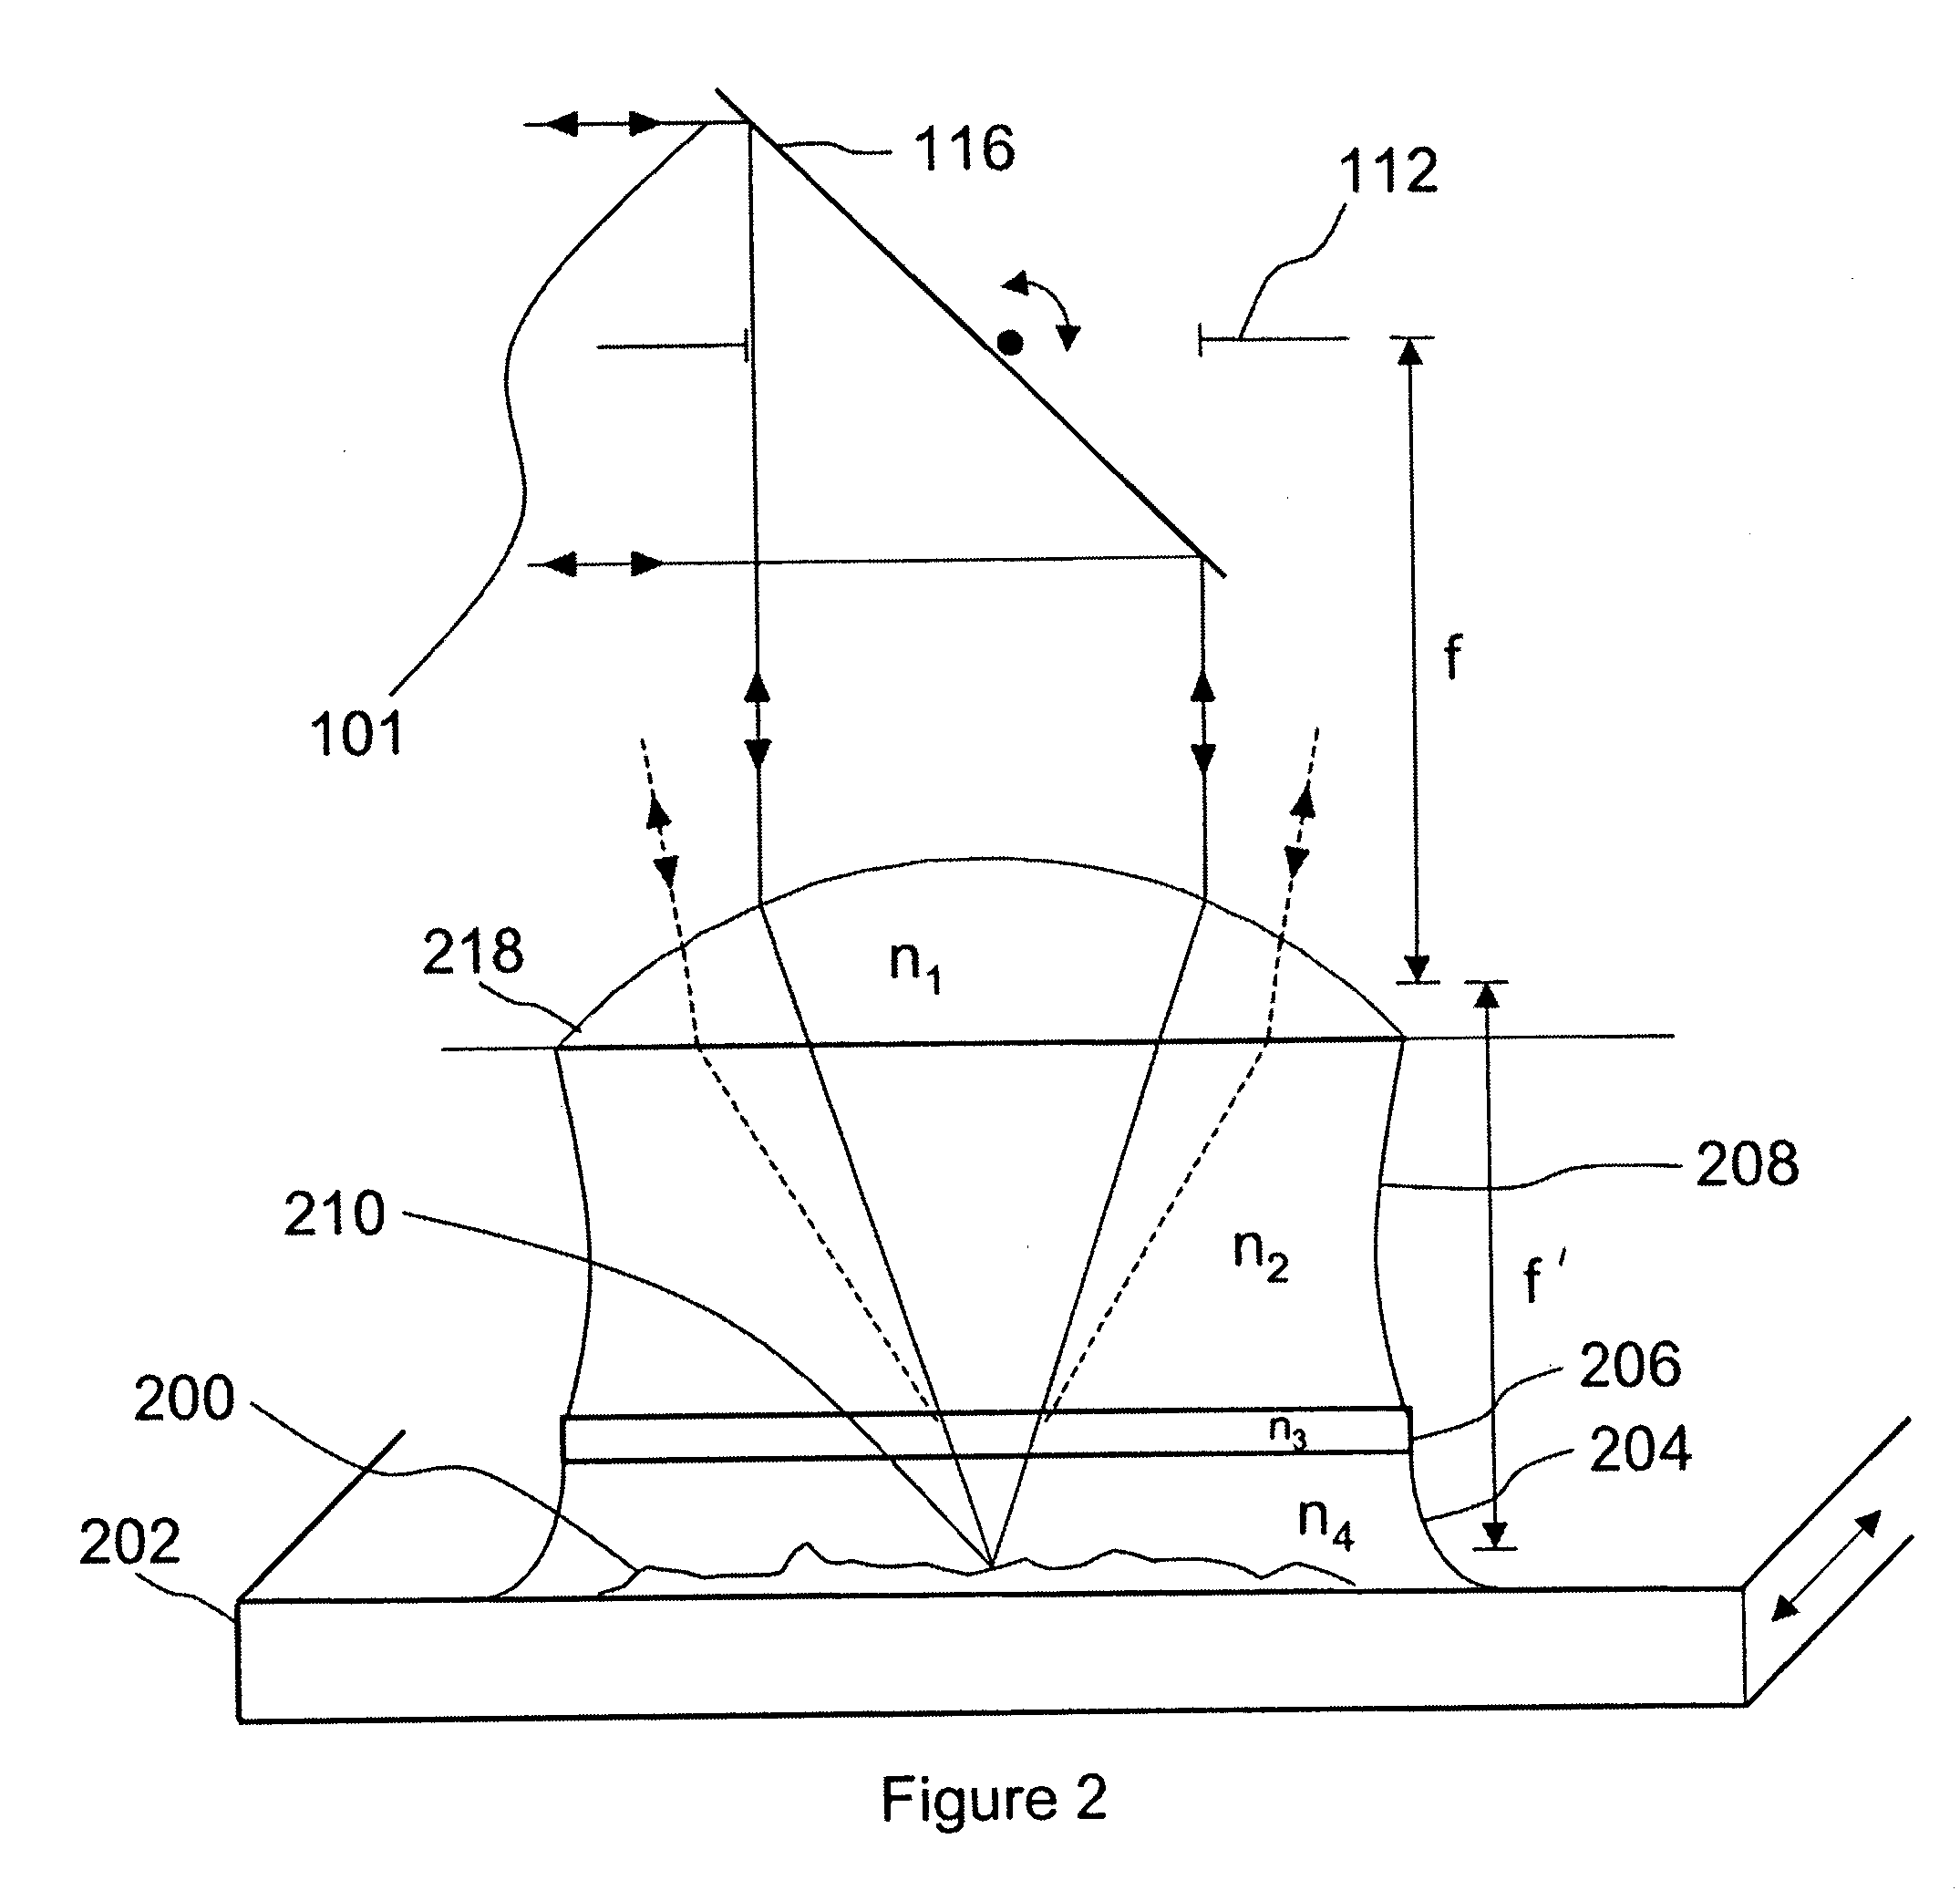 Scanning beam optical imaging system for macroscopic imaging of an object